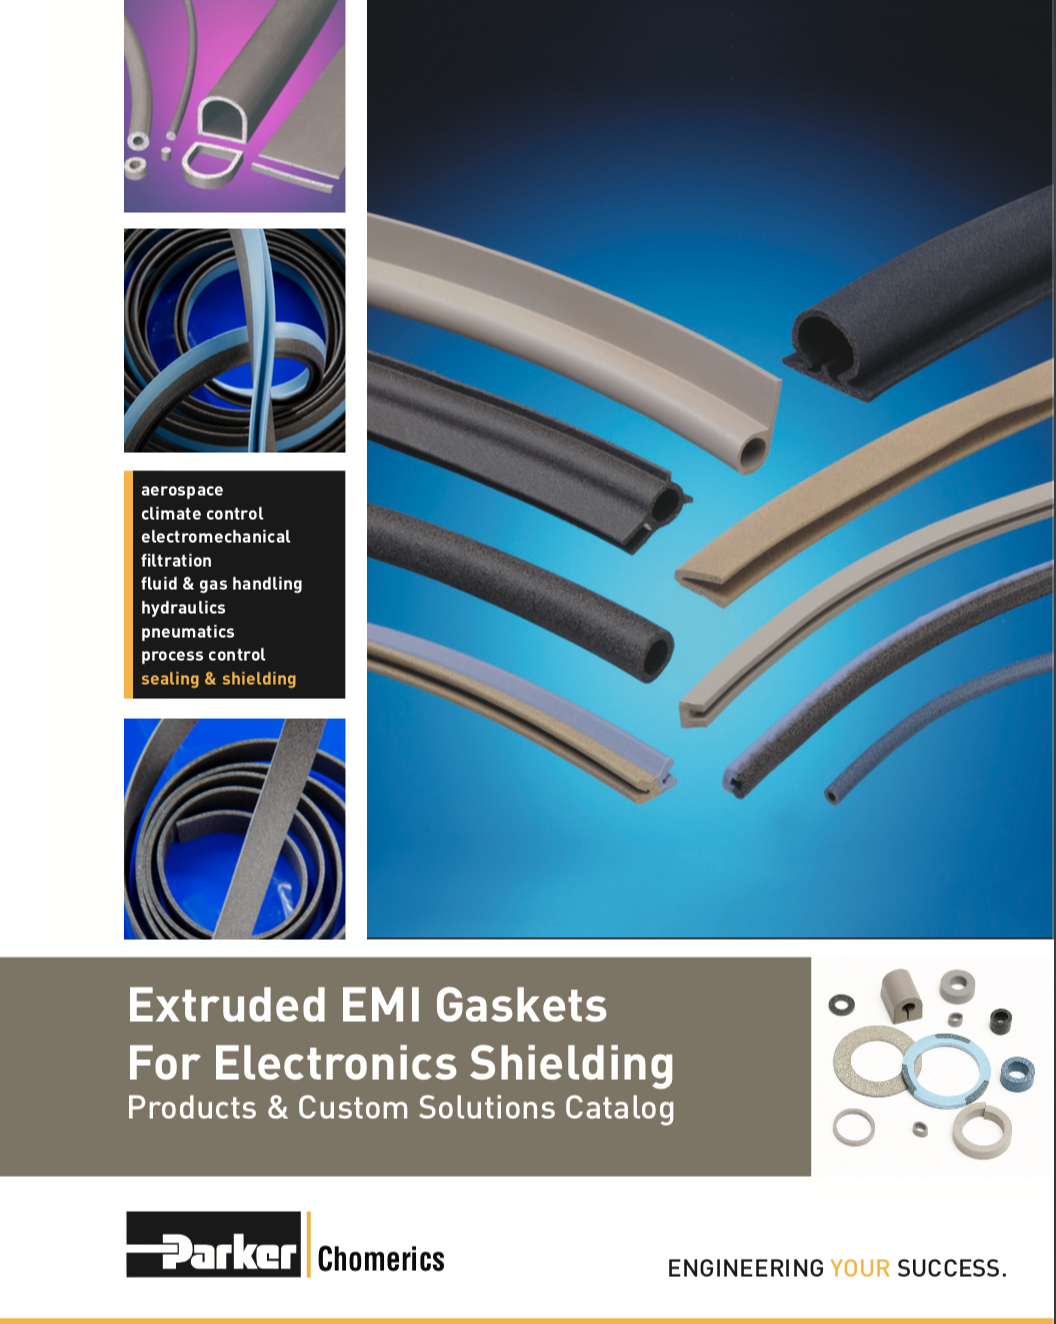 Extruded EMI Gaskets for Electronics Shielding catalog